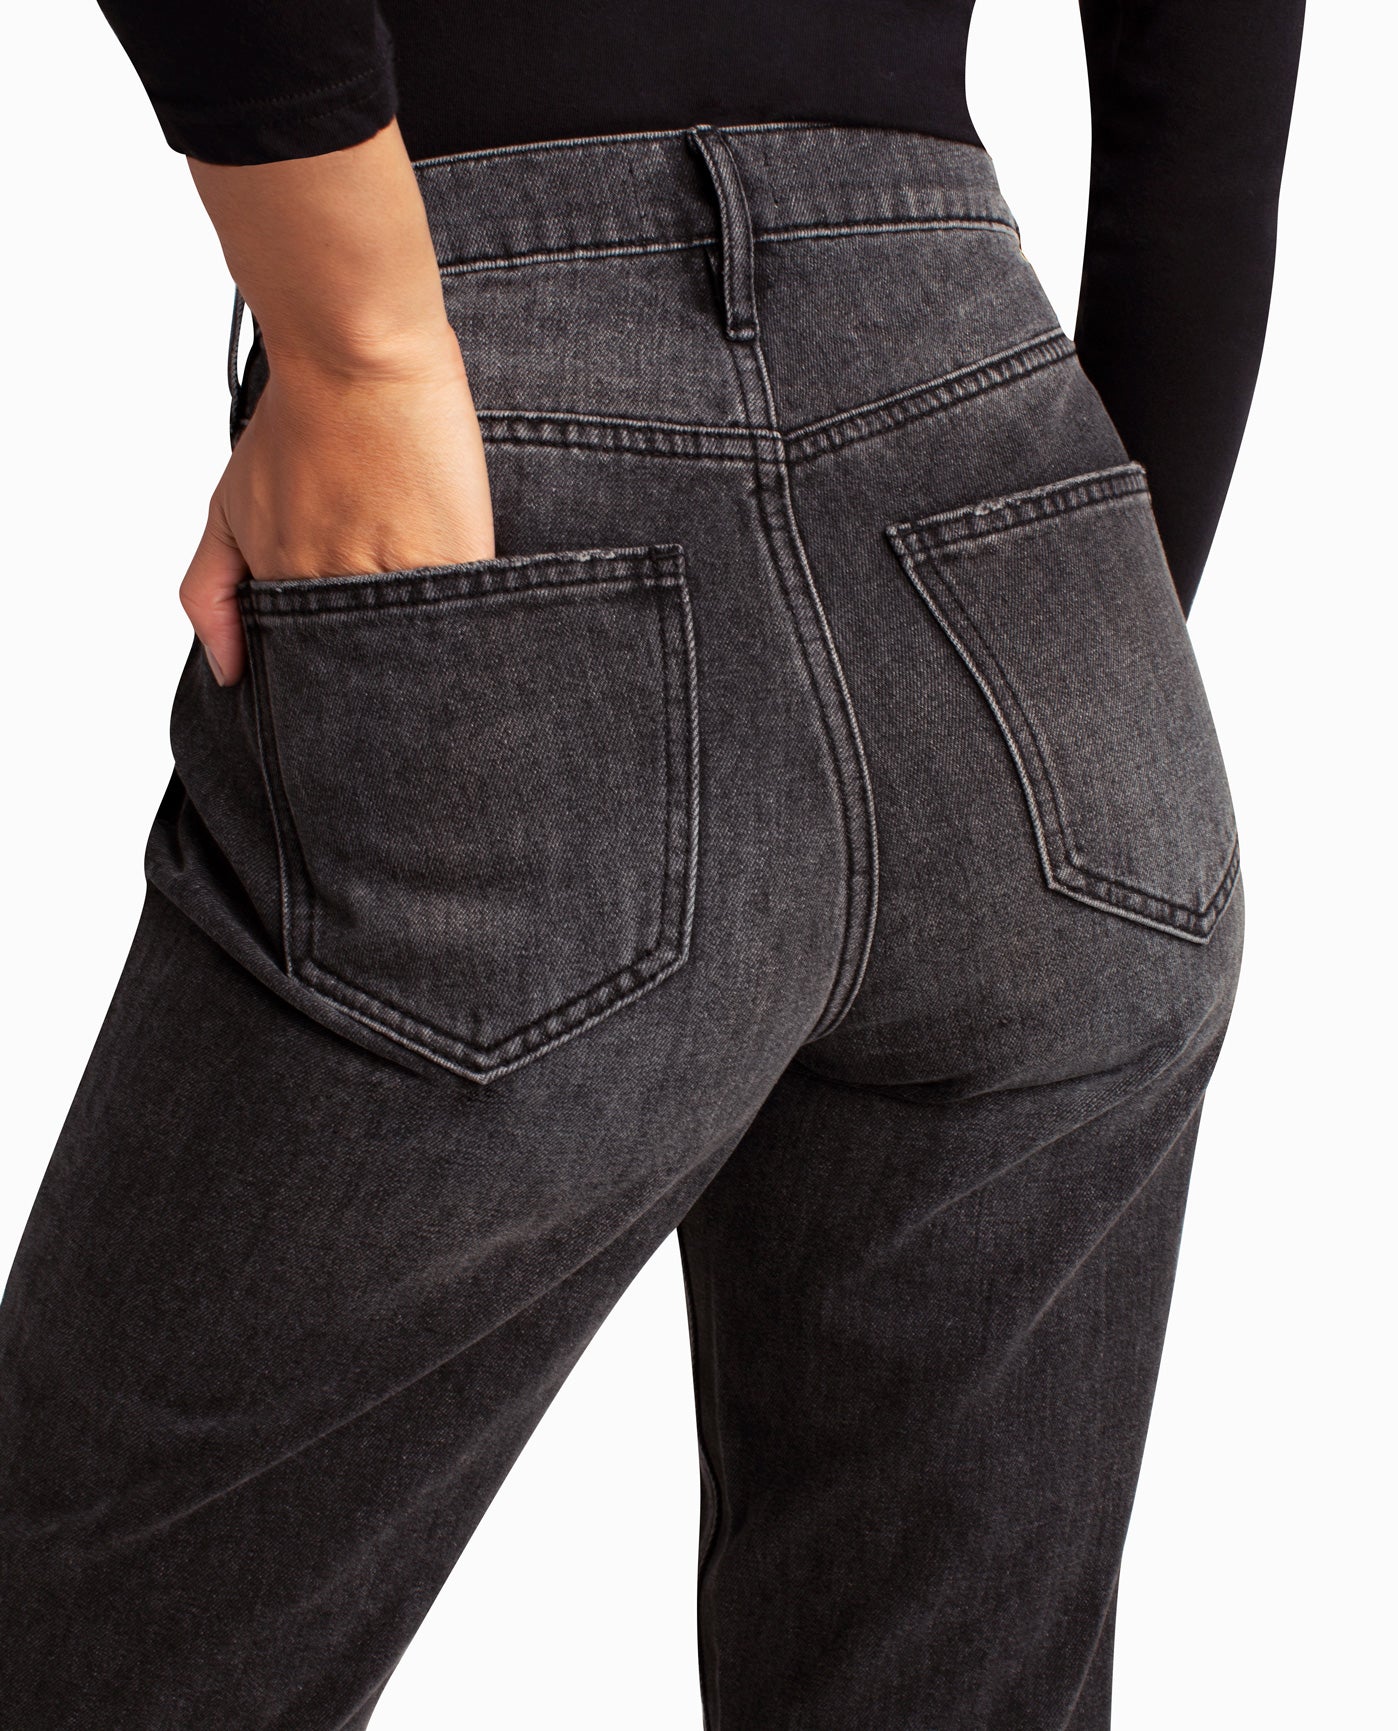 POCKET FEATURE OF HARLEM HIGH RISE TAPERED JEAN | Black